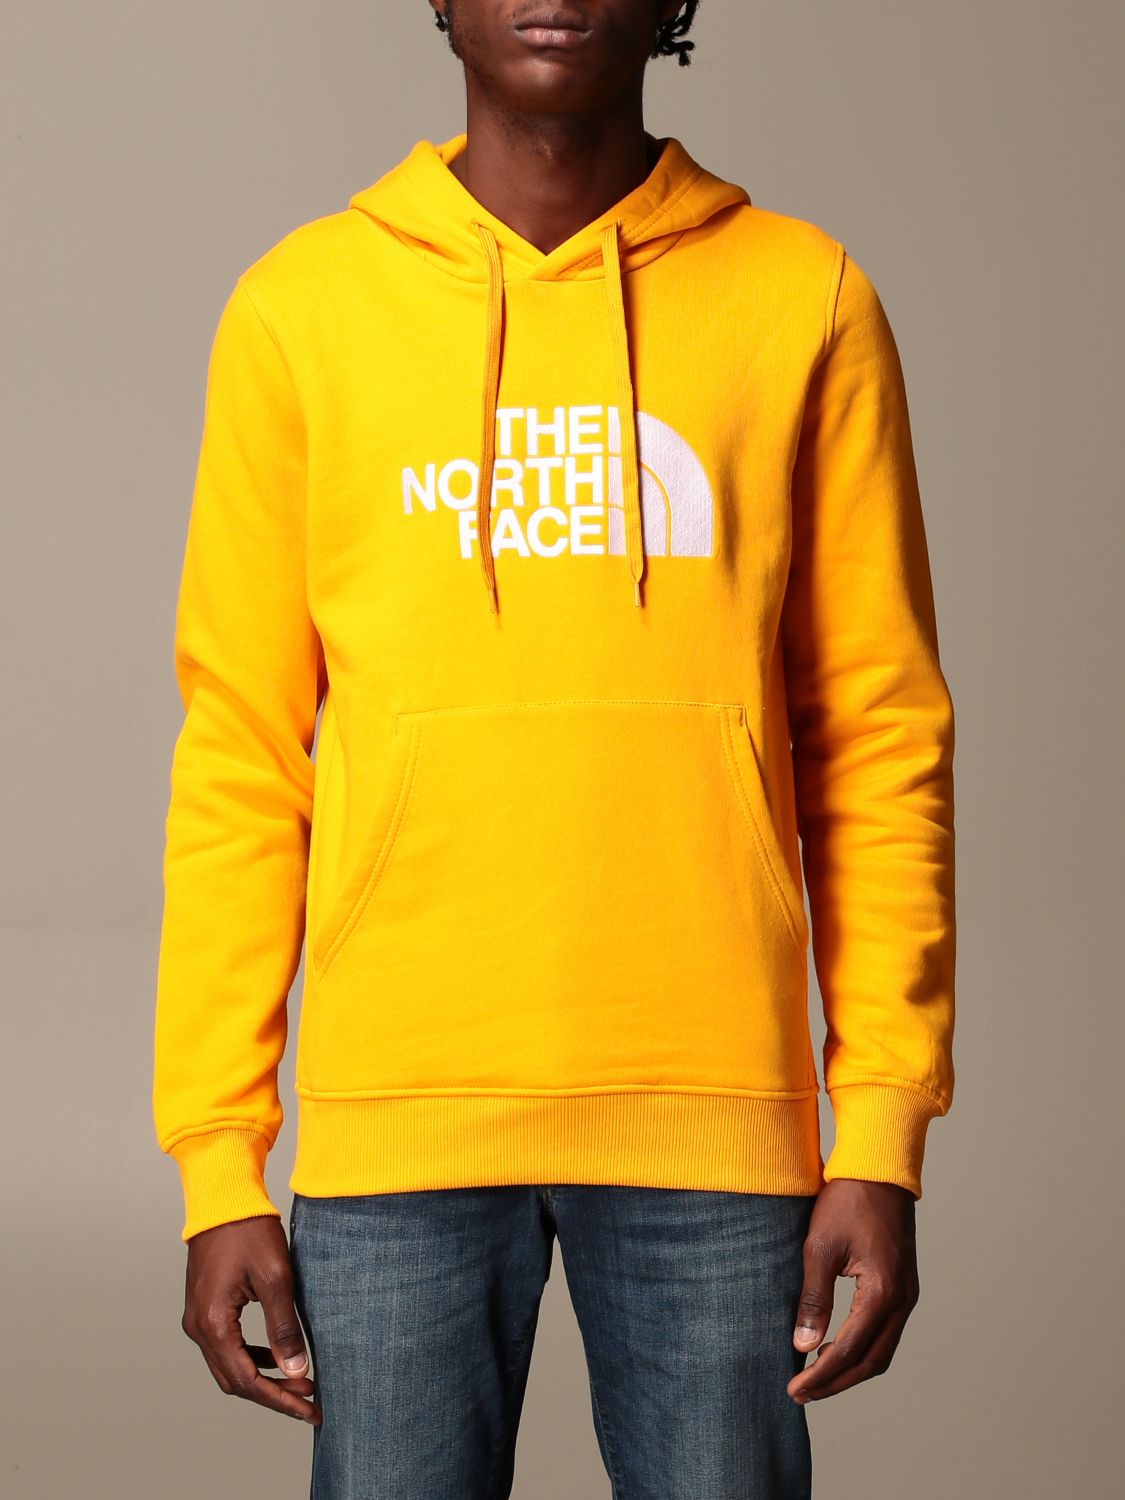 THE NORTH FACE: sweatshirt for men - Yellow | The North Face sweatshirt ...